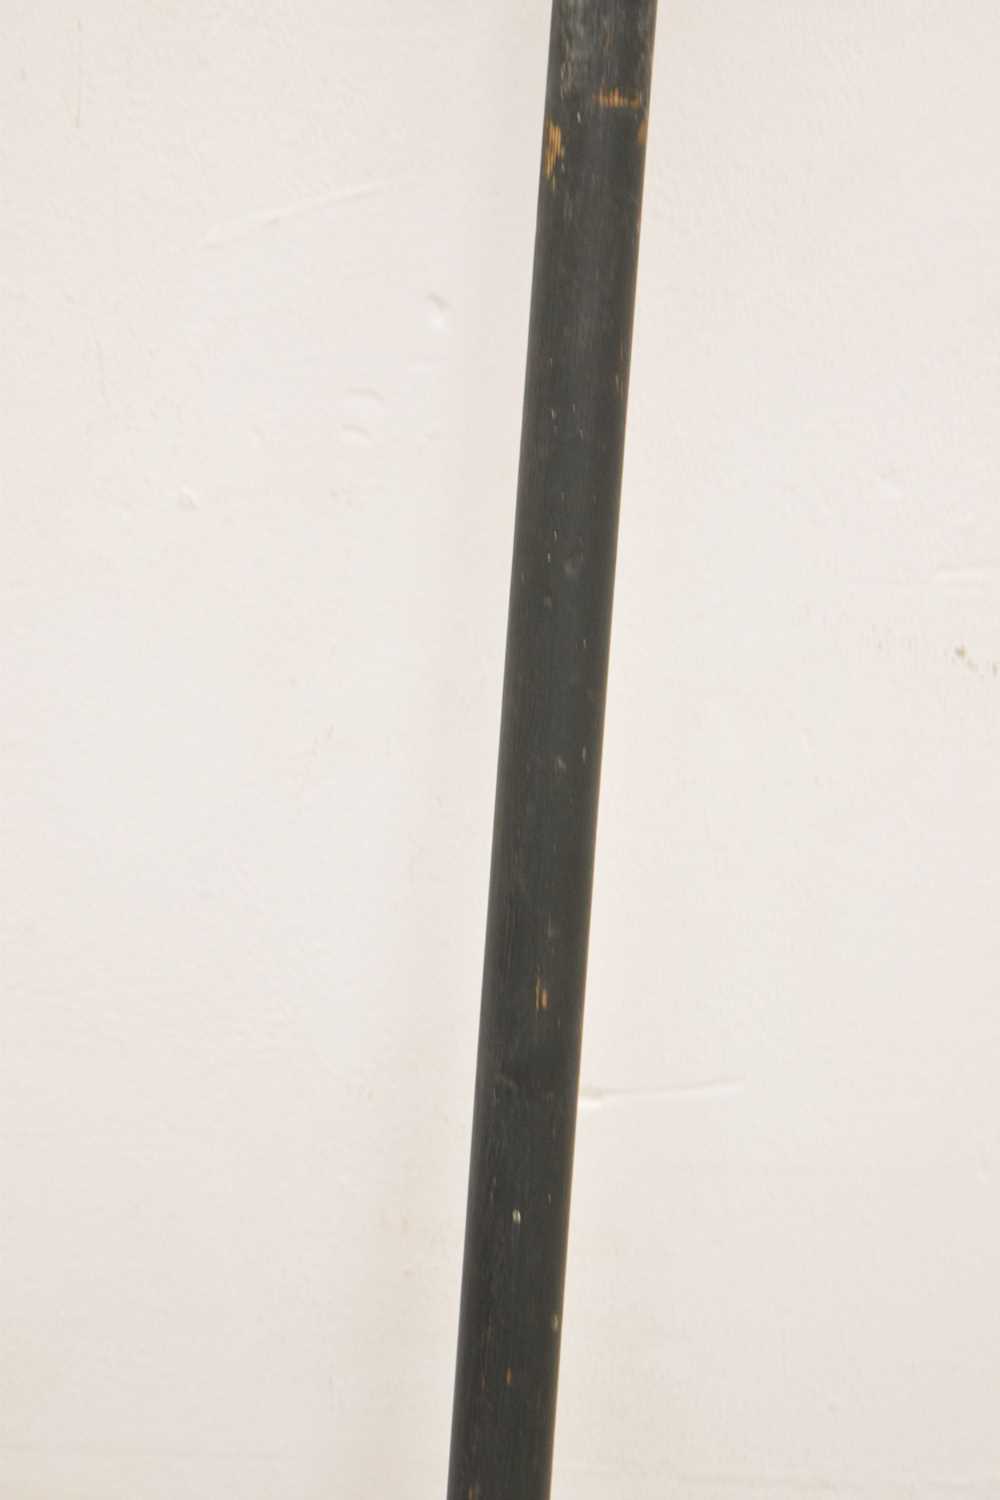 Slim wooden curtain pole - Image 5 of 7